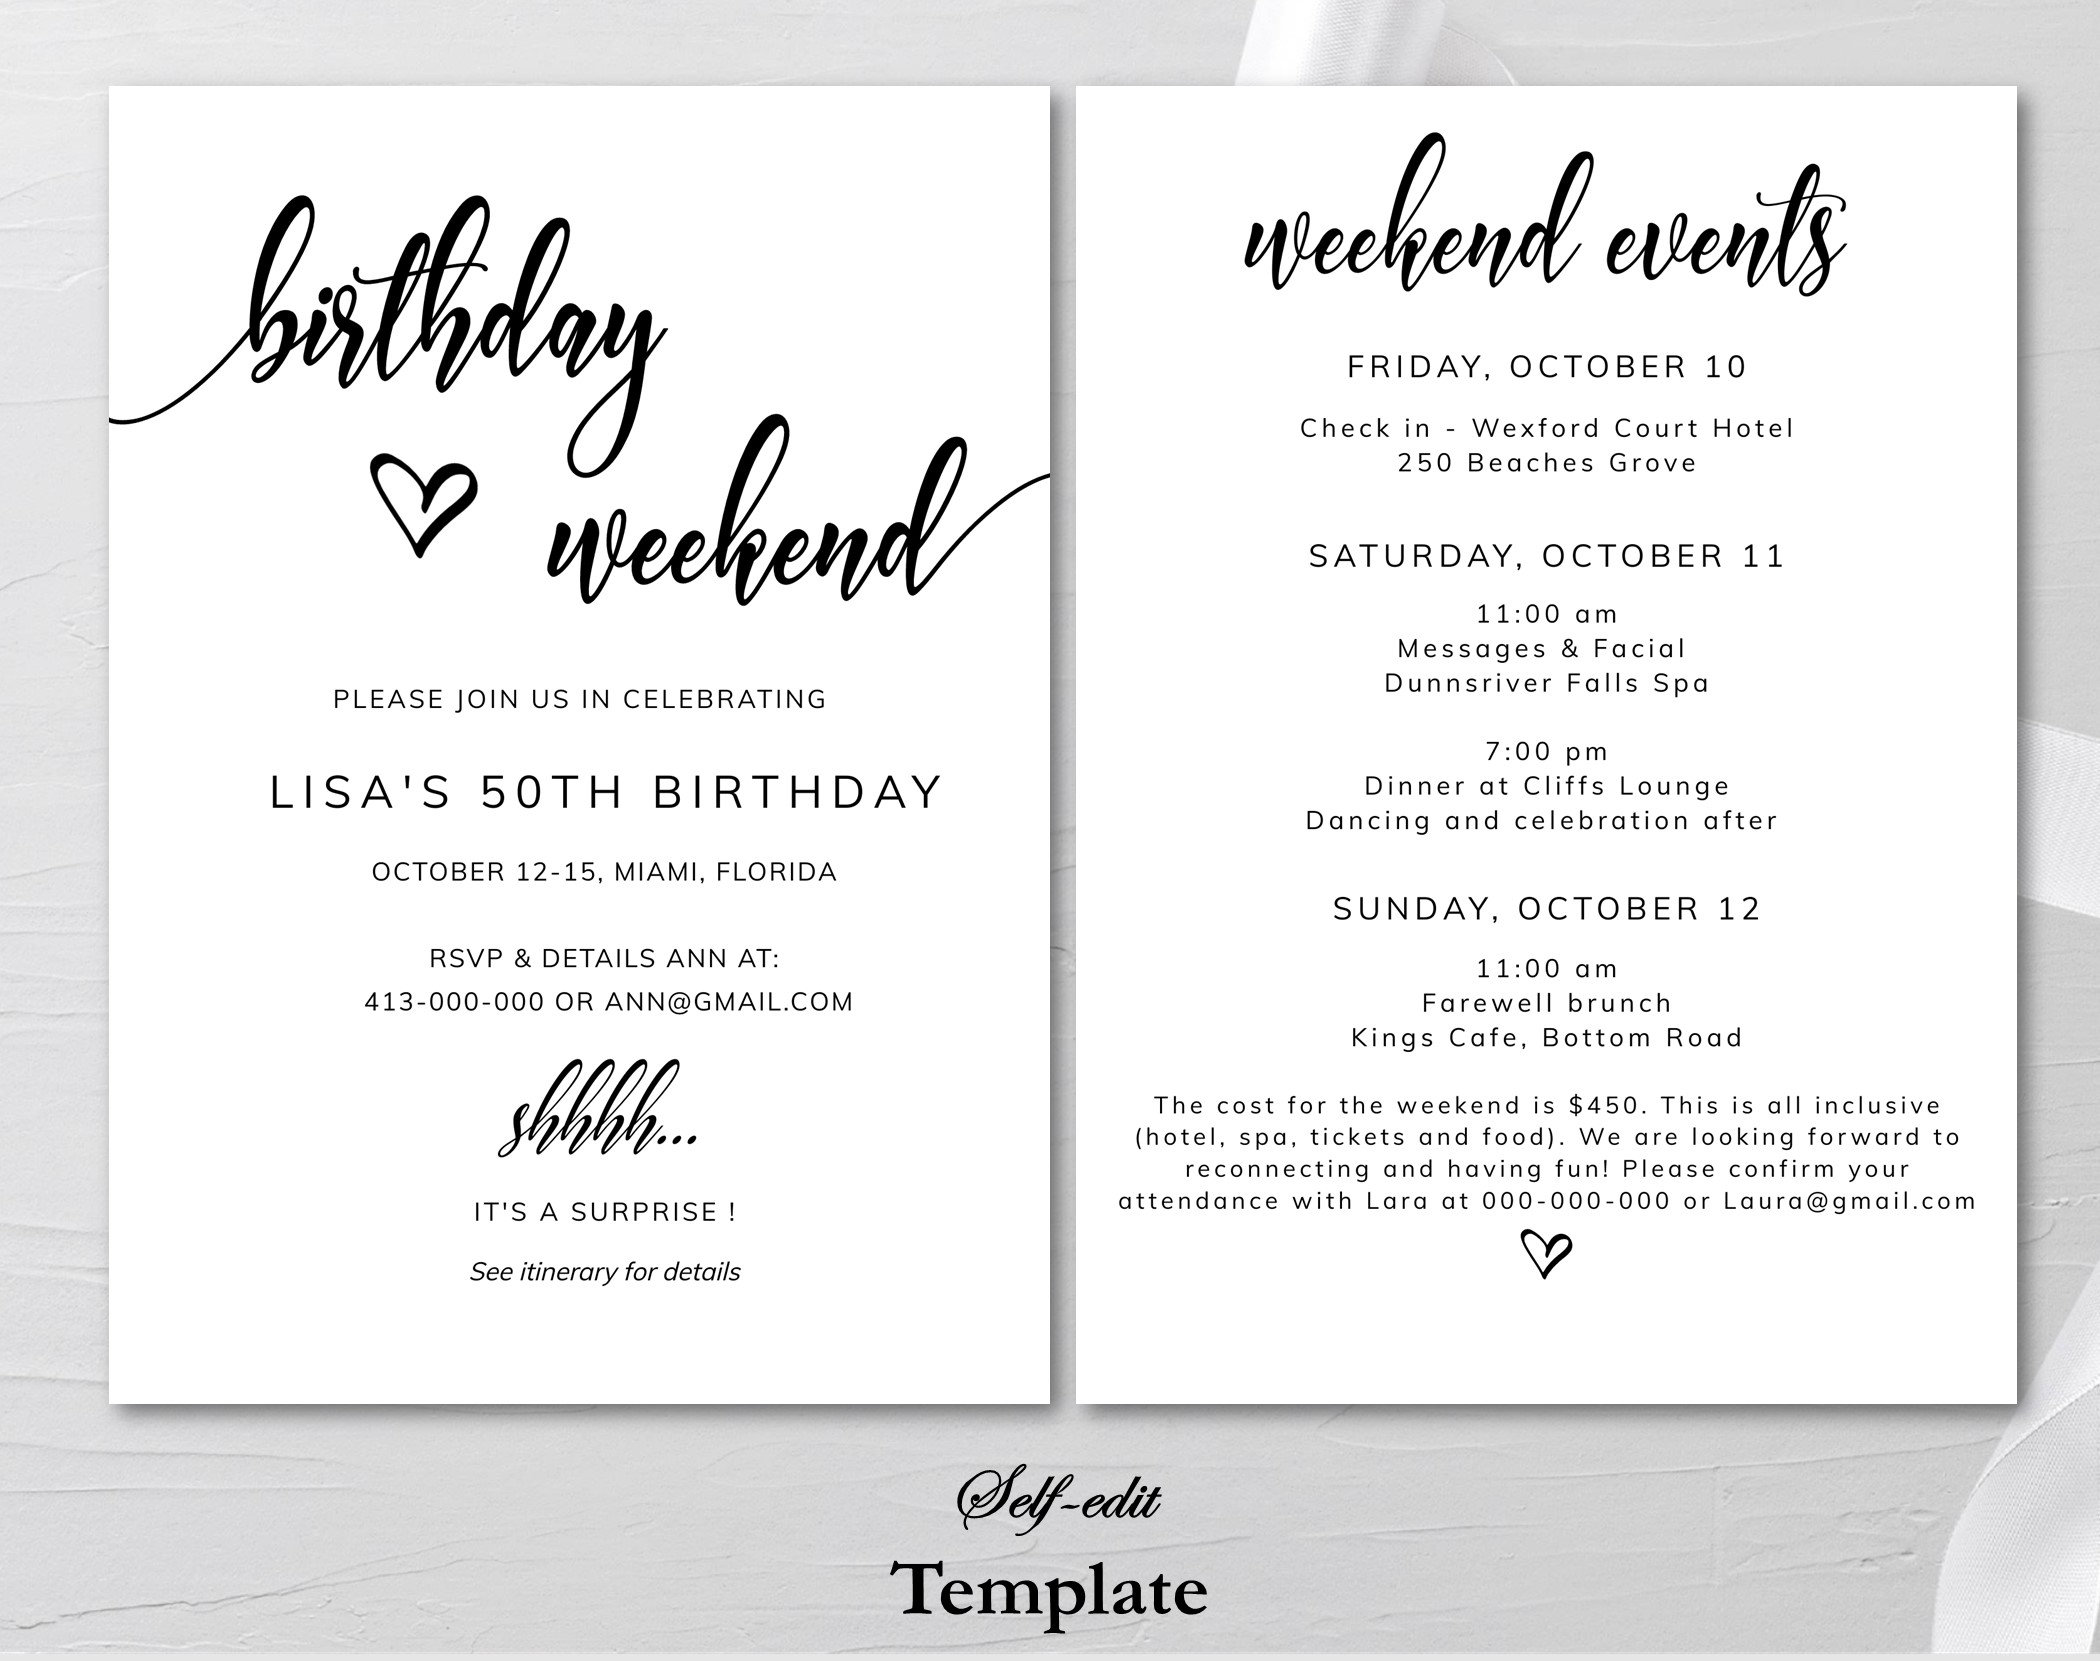 birthday-party-itinerary-how-to-create-a-birthday-party-itinerary-download-this-birthday